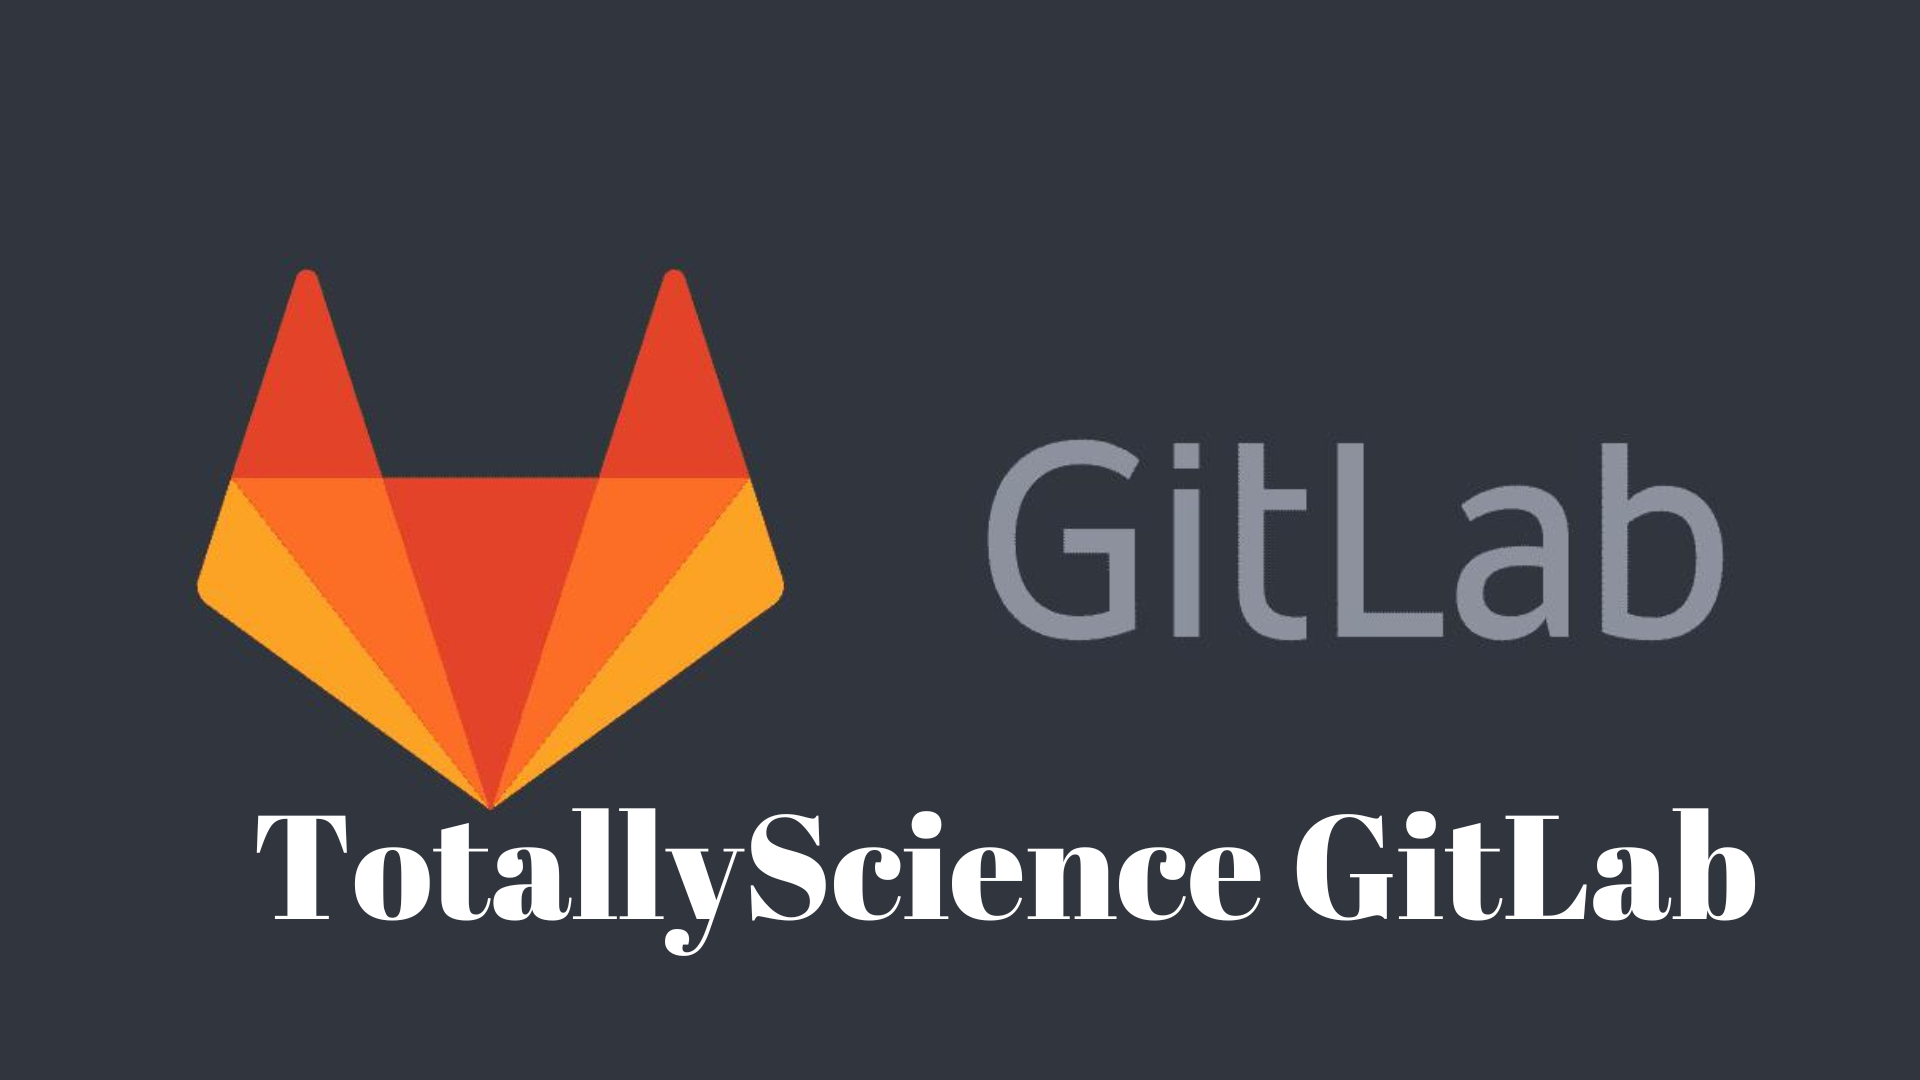 "Revolutionizing Collaboration: The Power of Totallyscience GitLab"